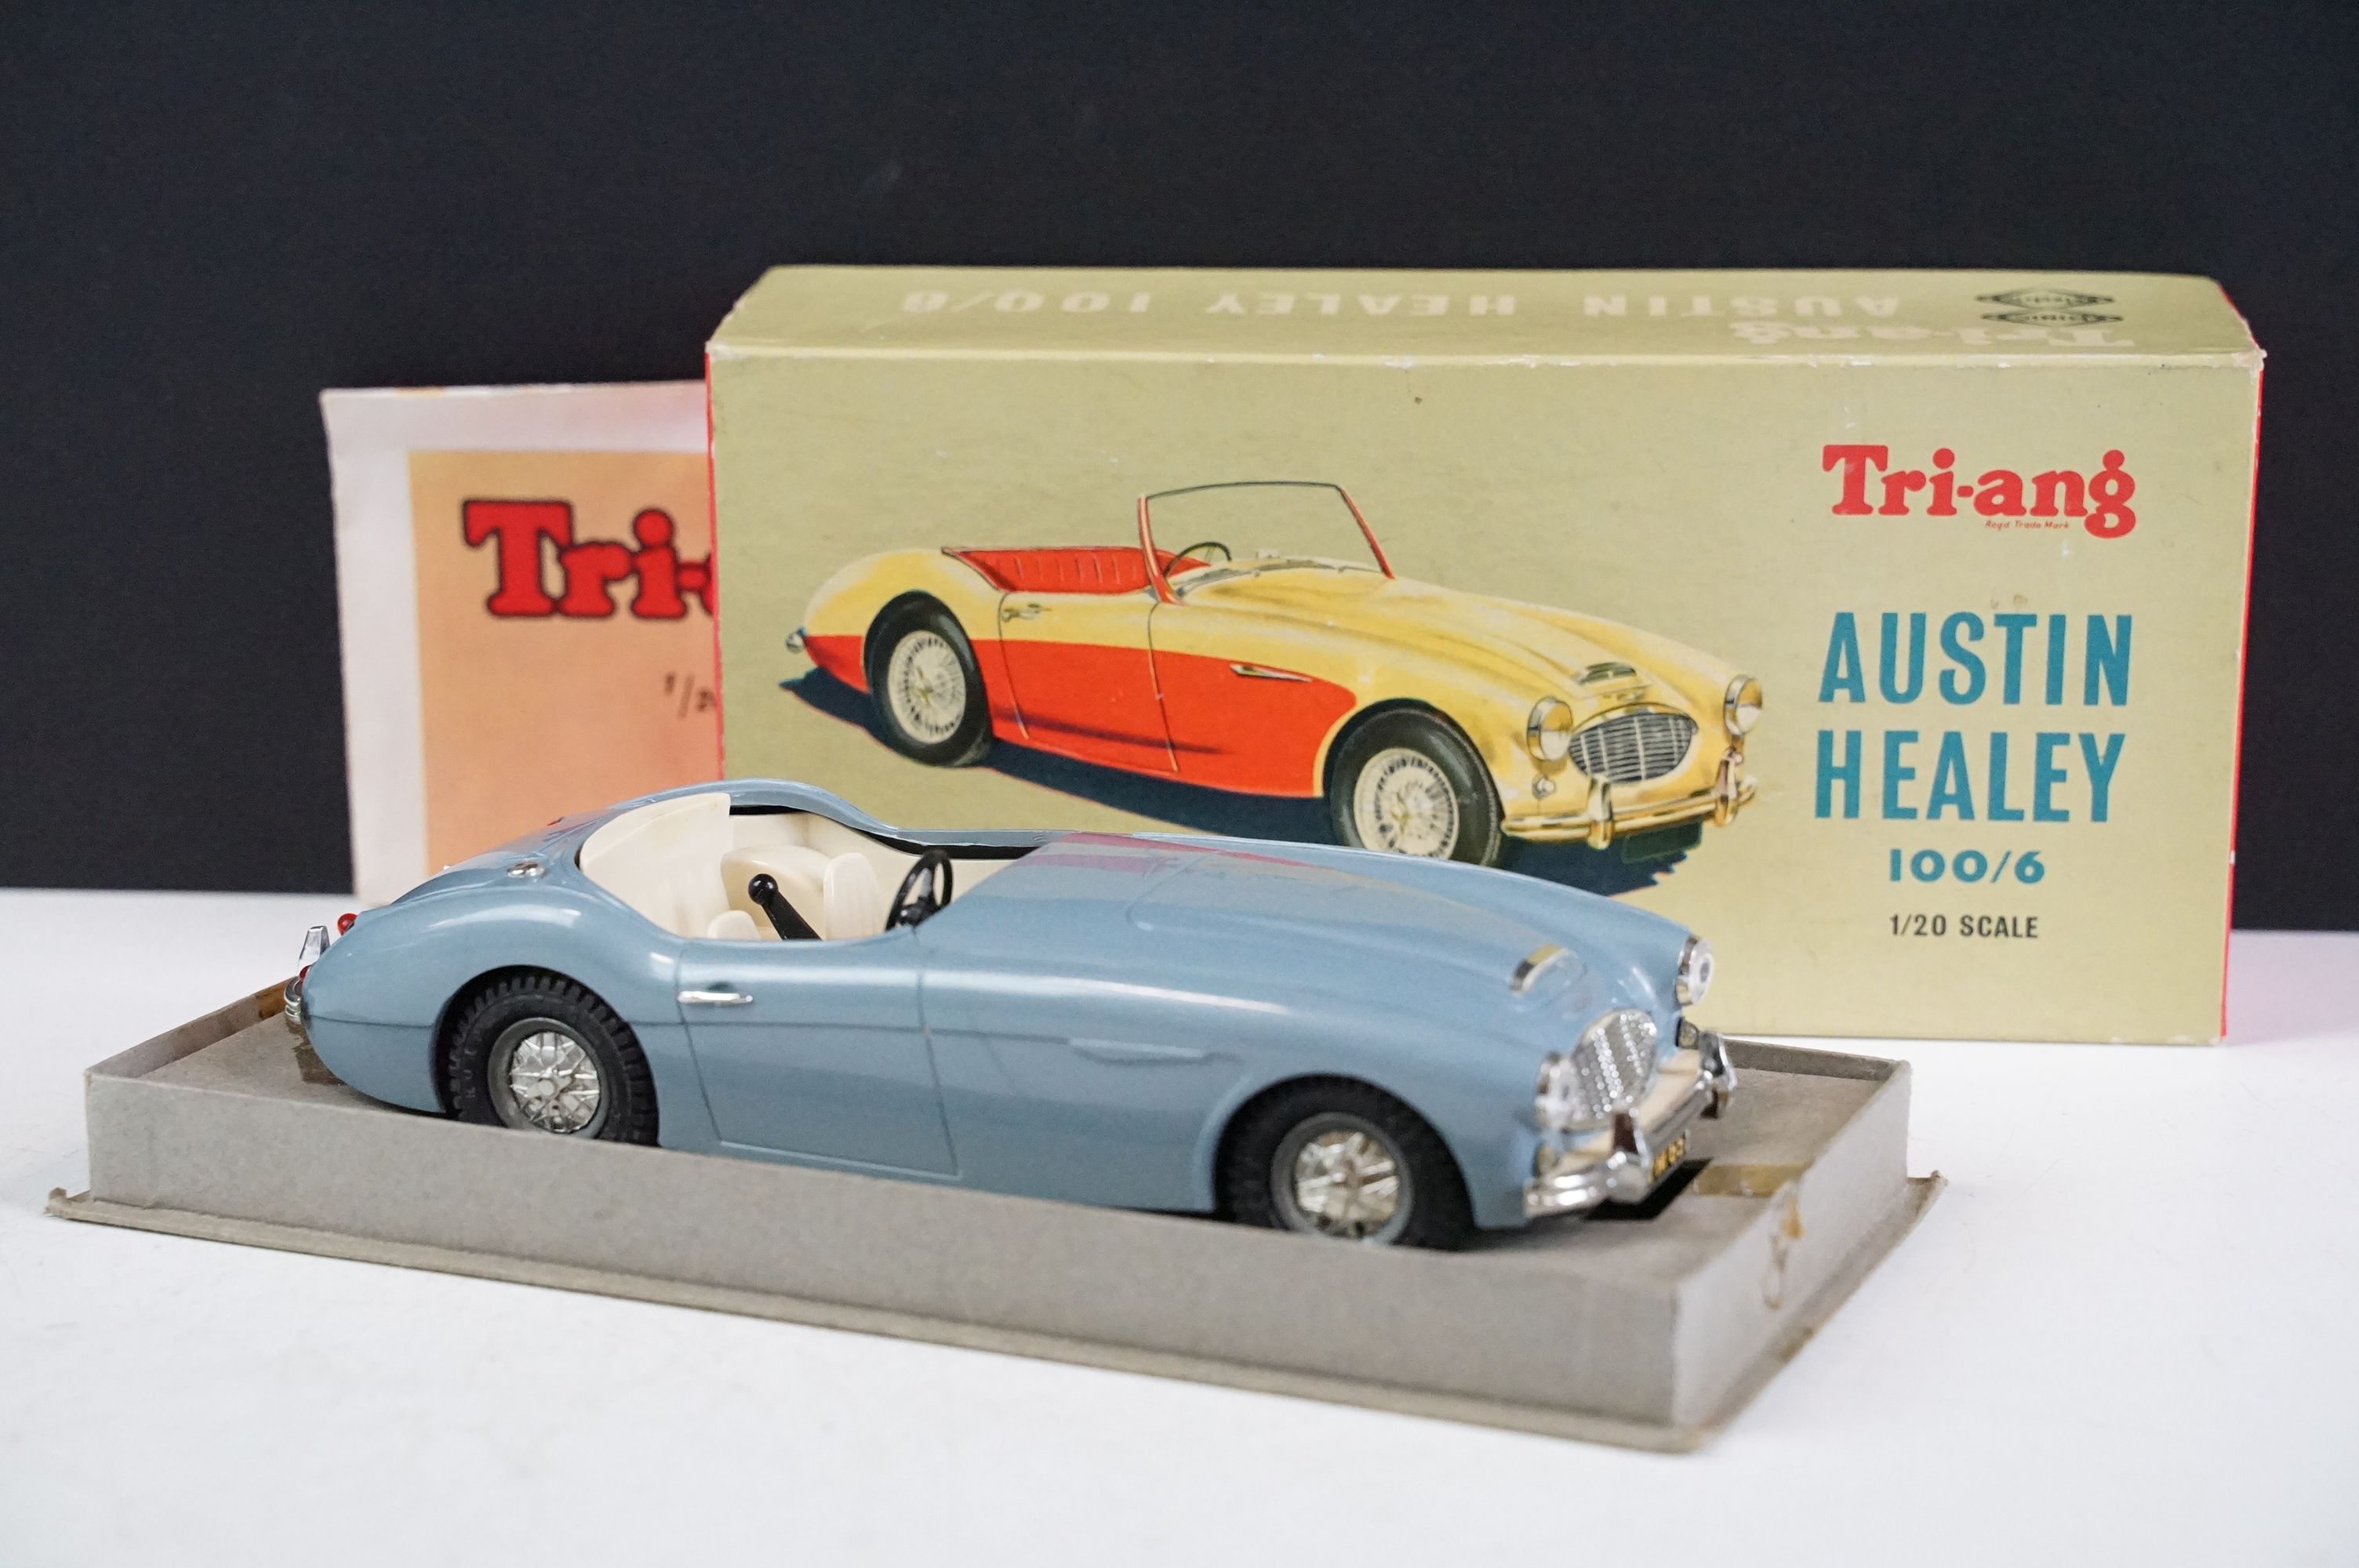 Boxed Triang Minic 1/20 Scale Electric Austin Healey 100/6 model in light blue with creamy white